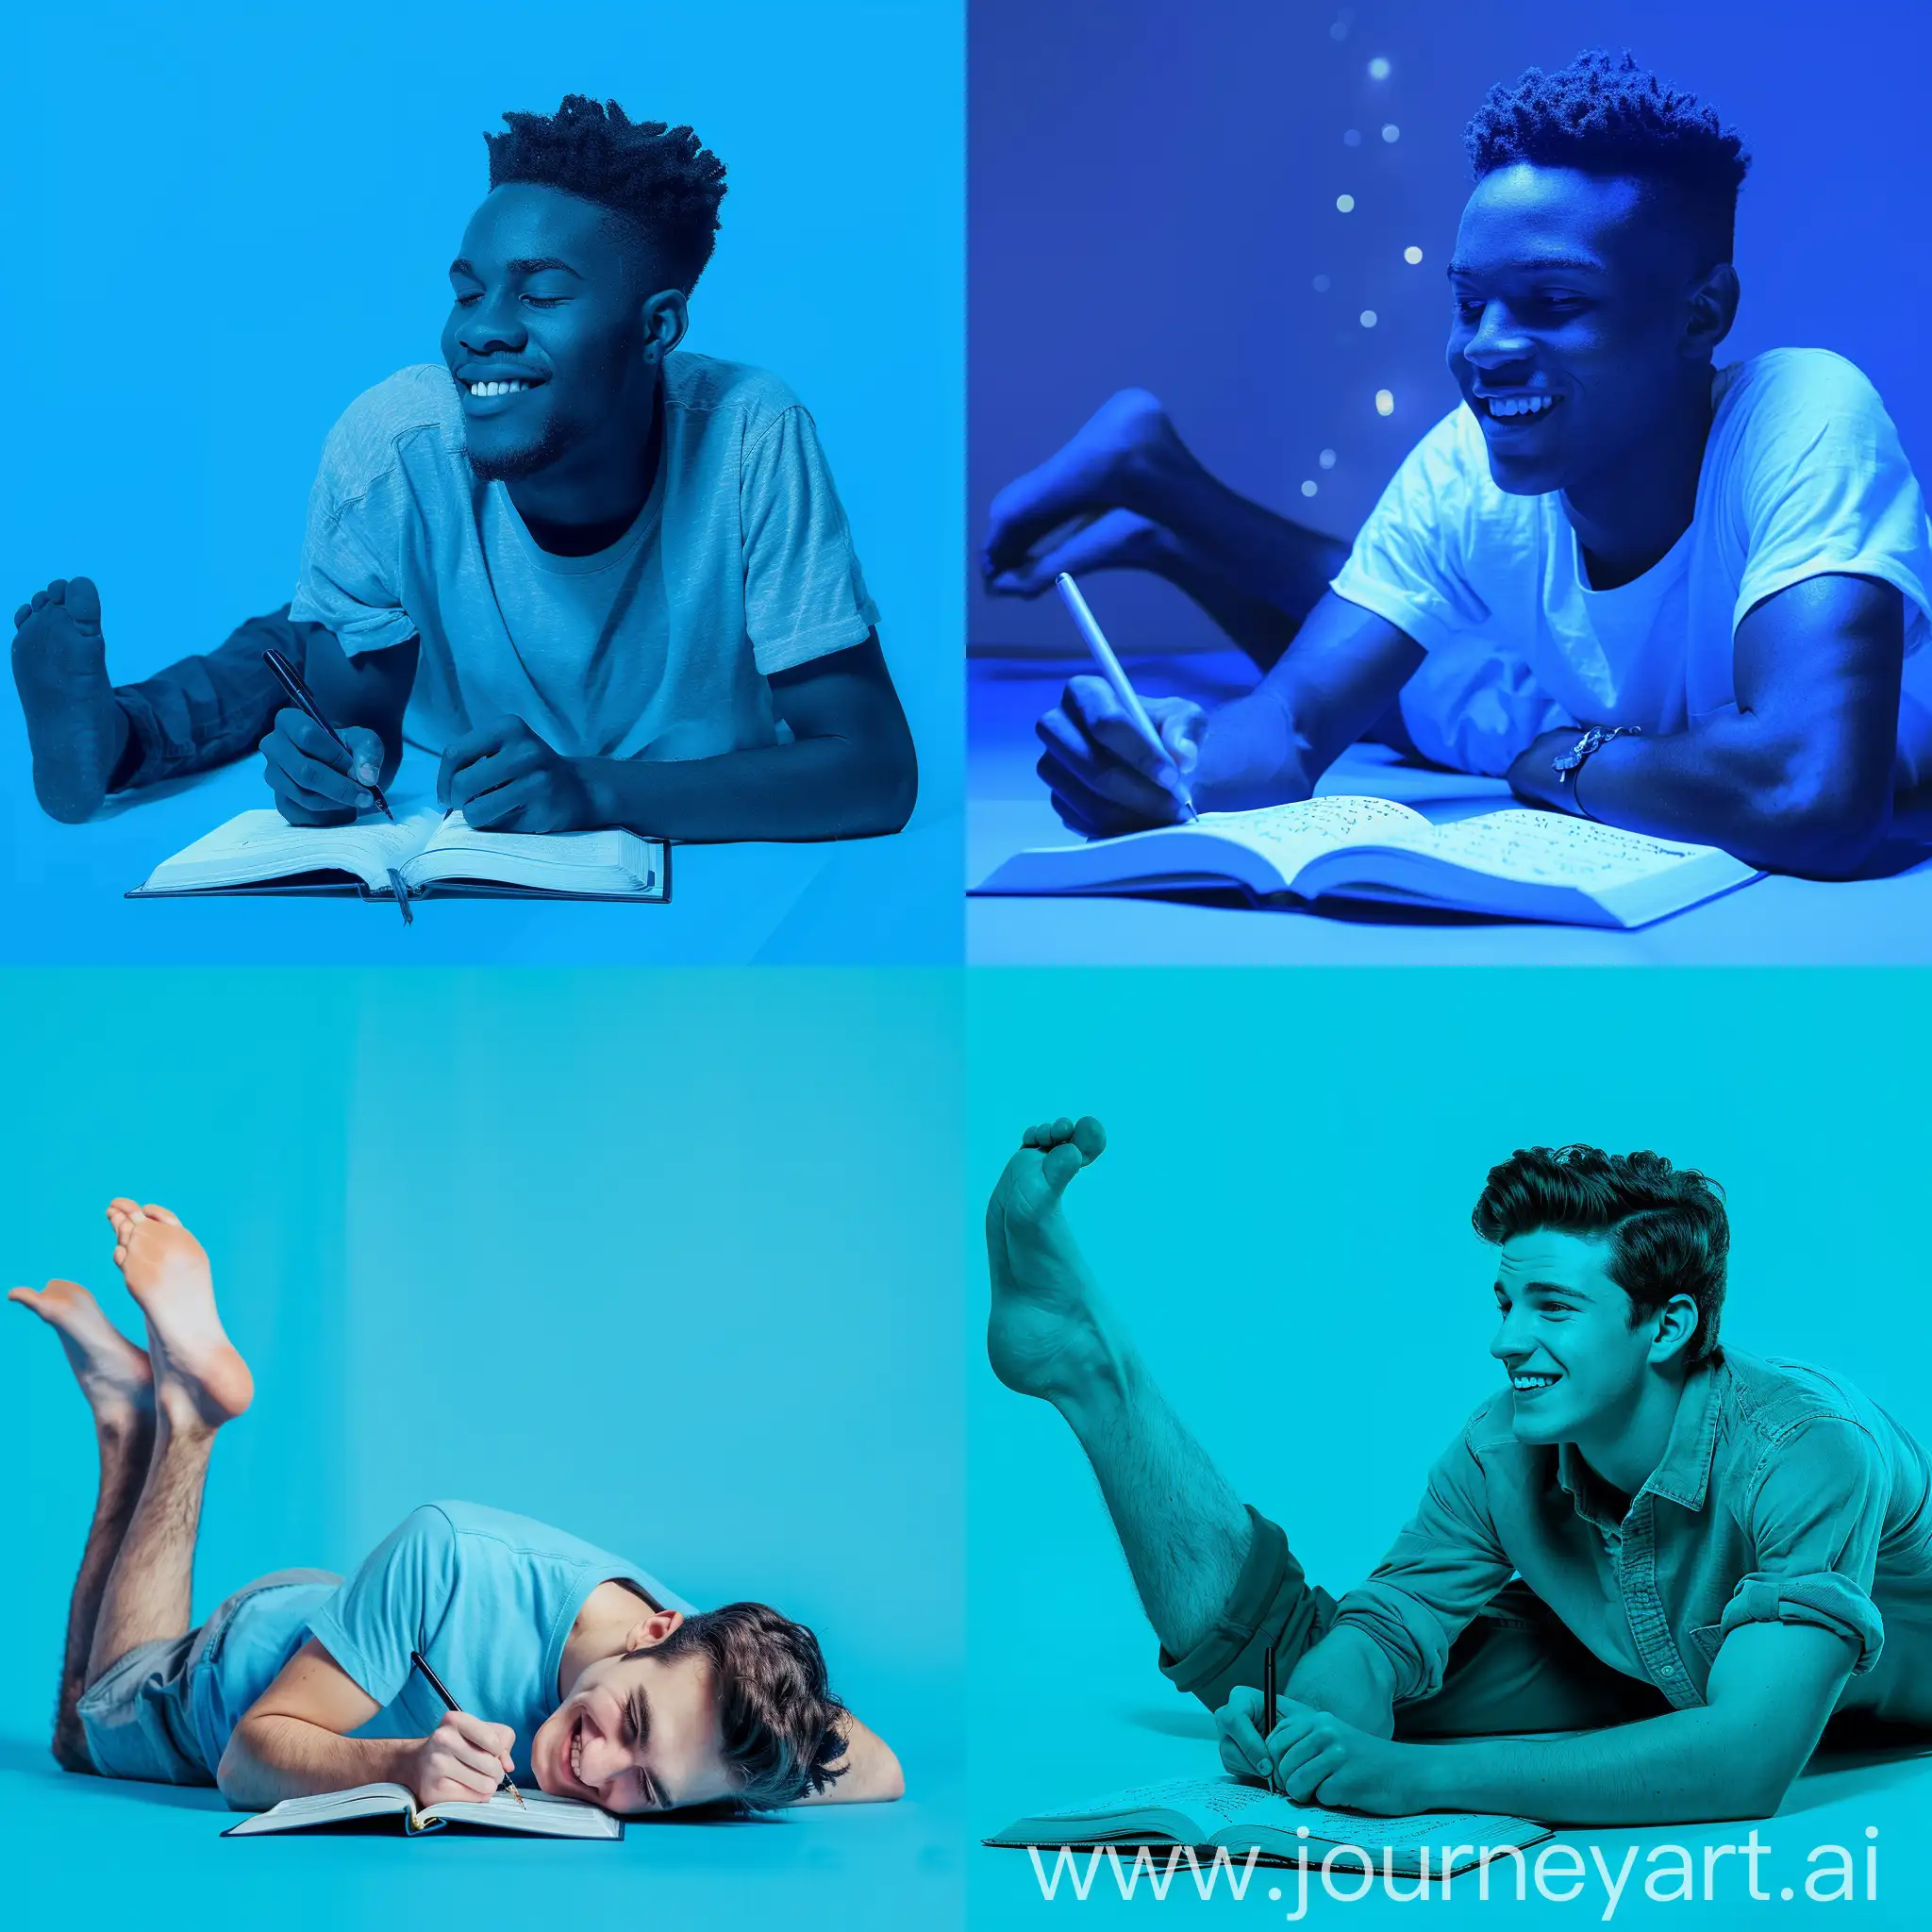 Smiling-Young-Man-Writing-in-Blue-Book-with-Feet-Raised